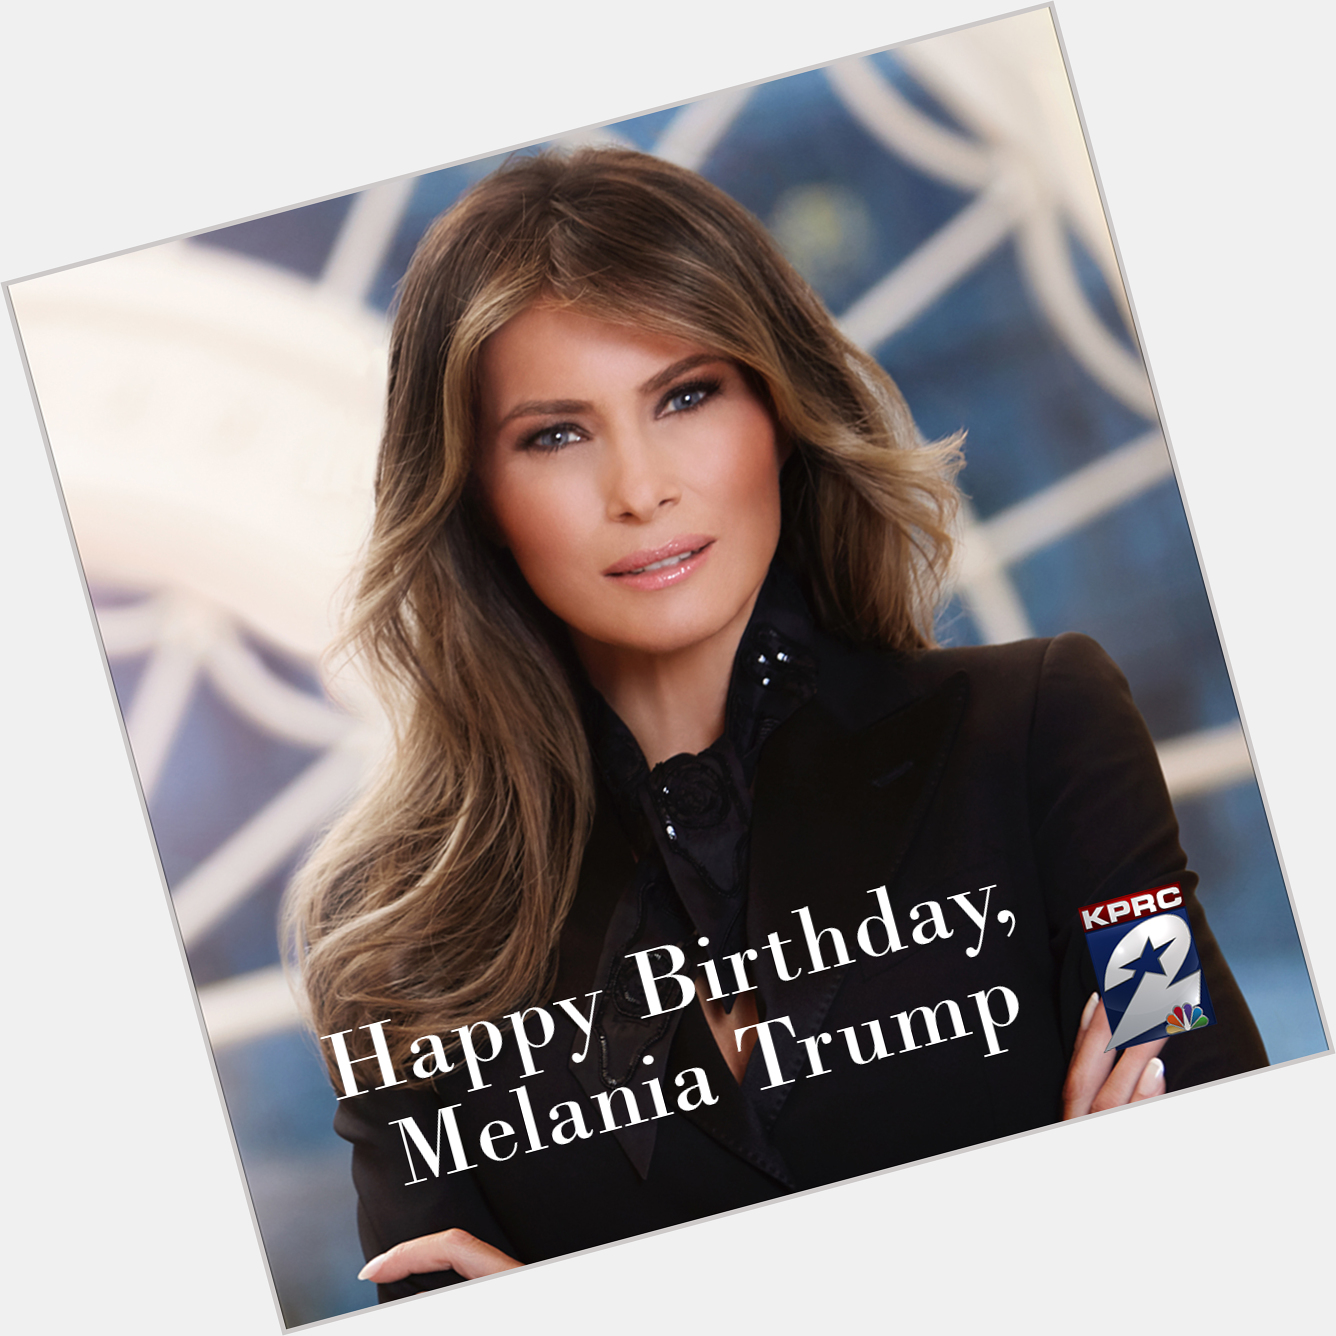 Happy Birthday, Melania Trump! The former first lady is 51 years old today. 